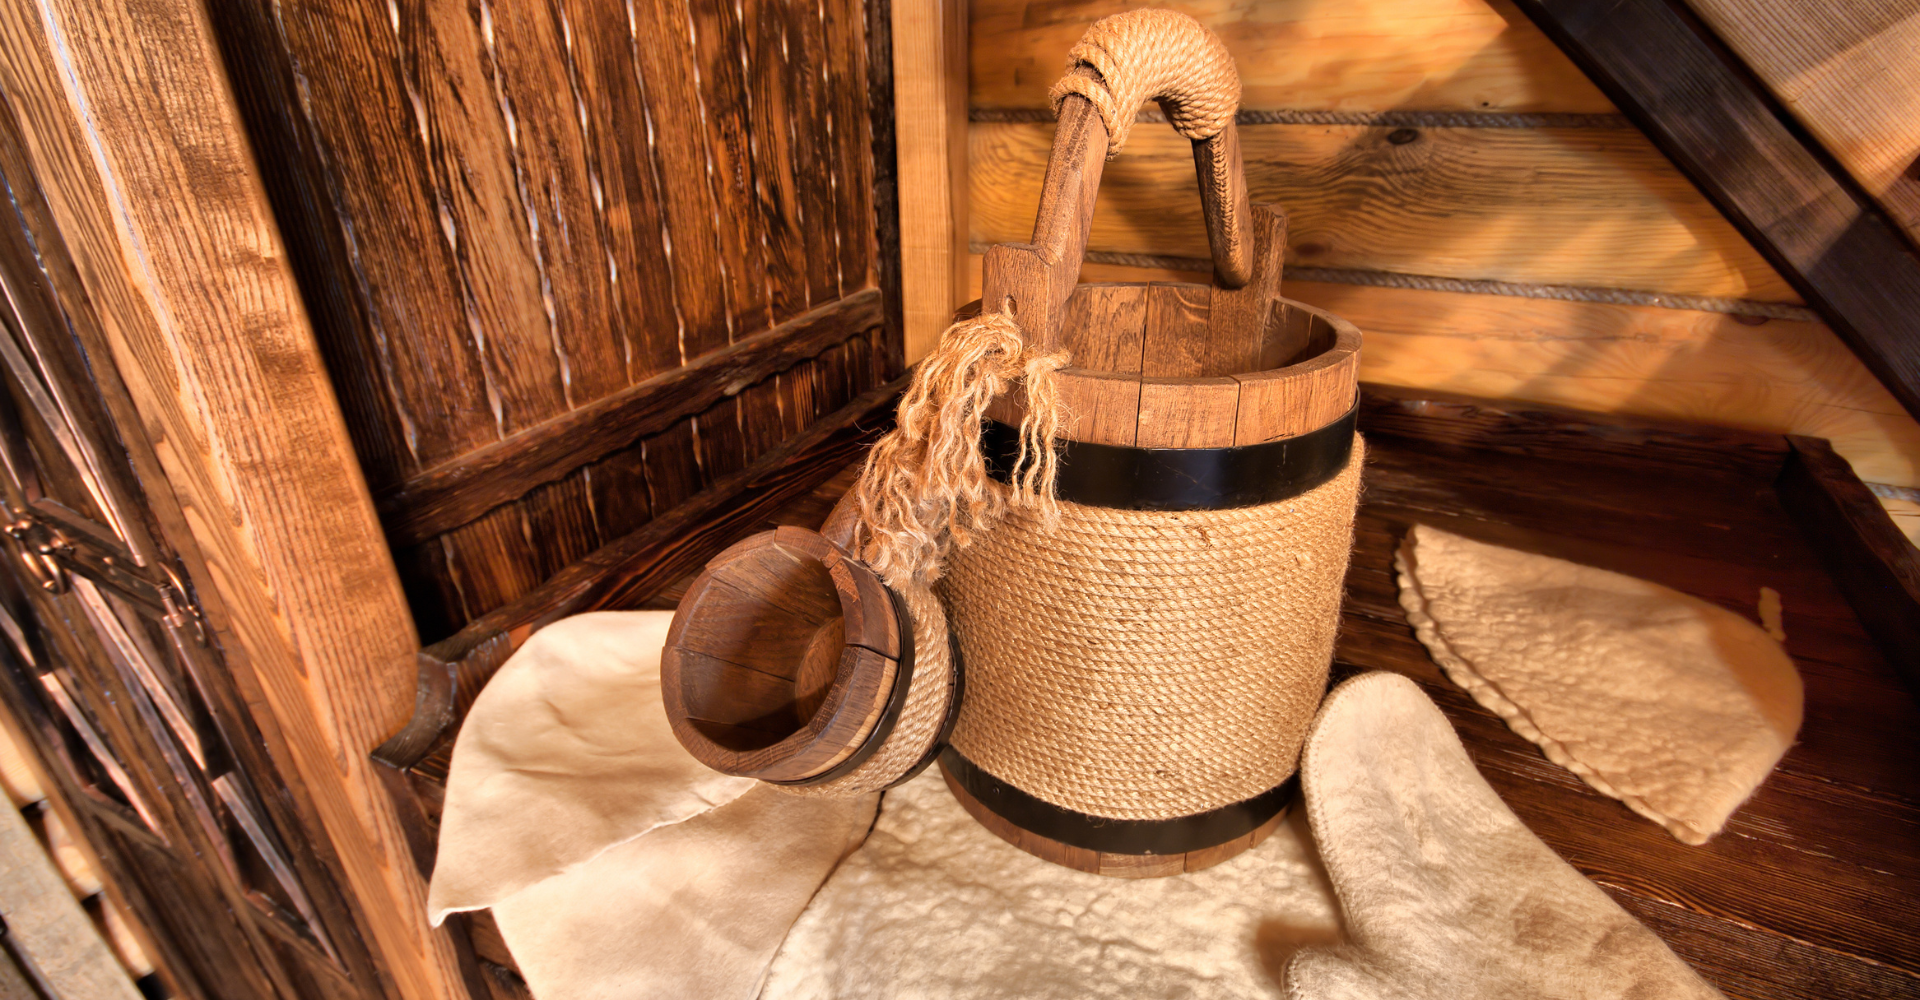 The Benefits of a Traditional Sauna